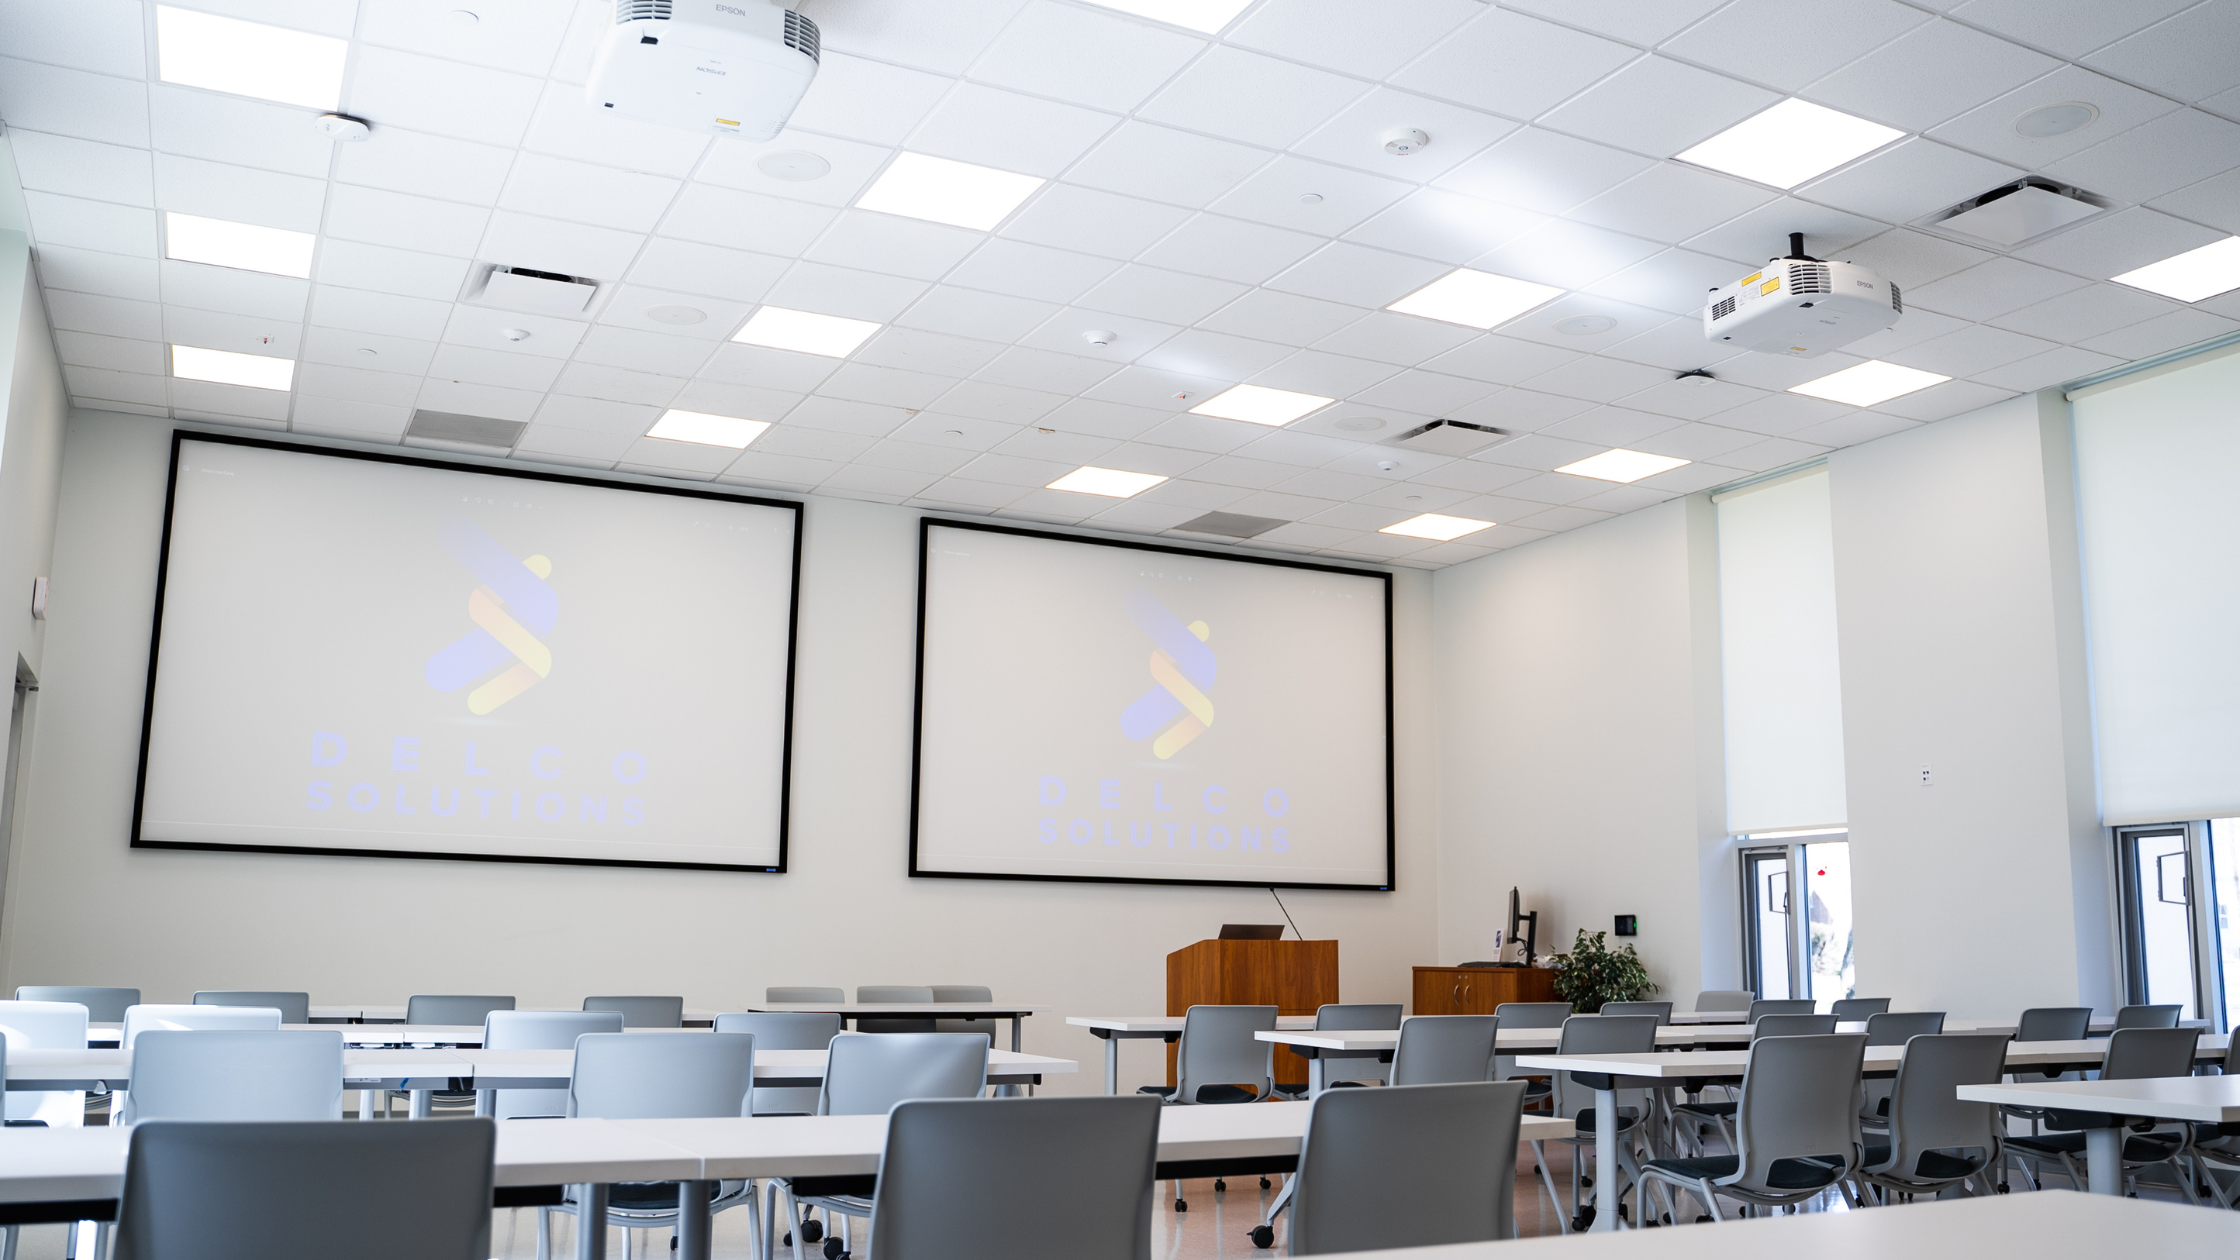 Classroom setup for hybrid learning with projectors and screens